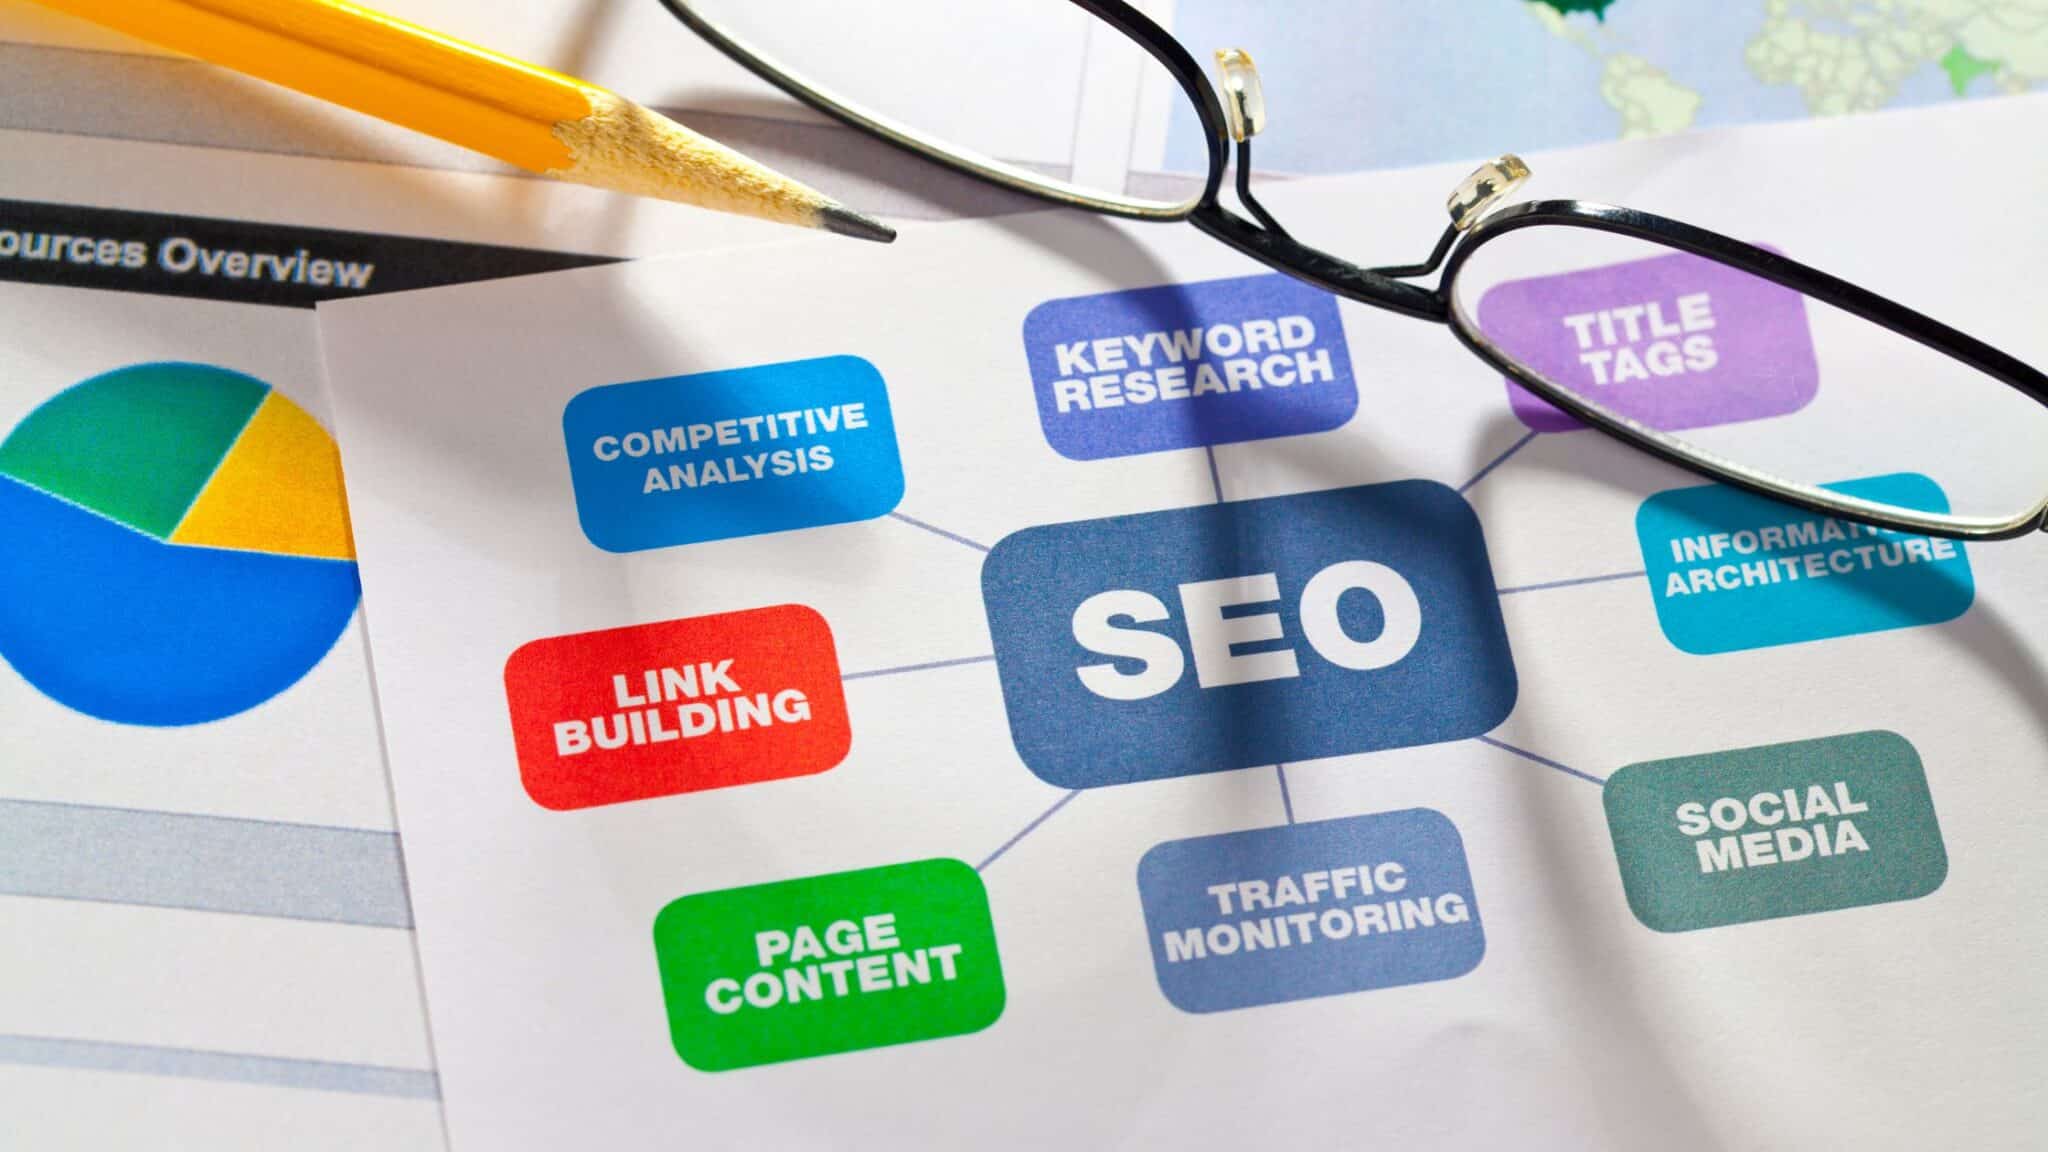 10 Best Ways to Find and Hire an SEO Expert